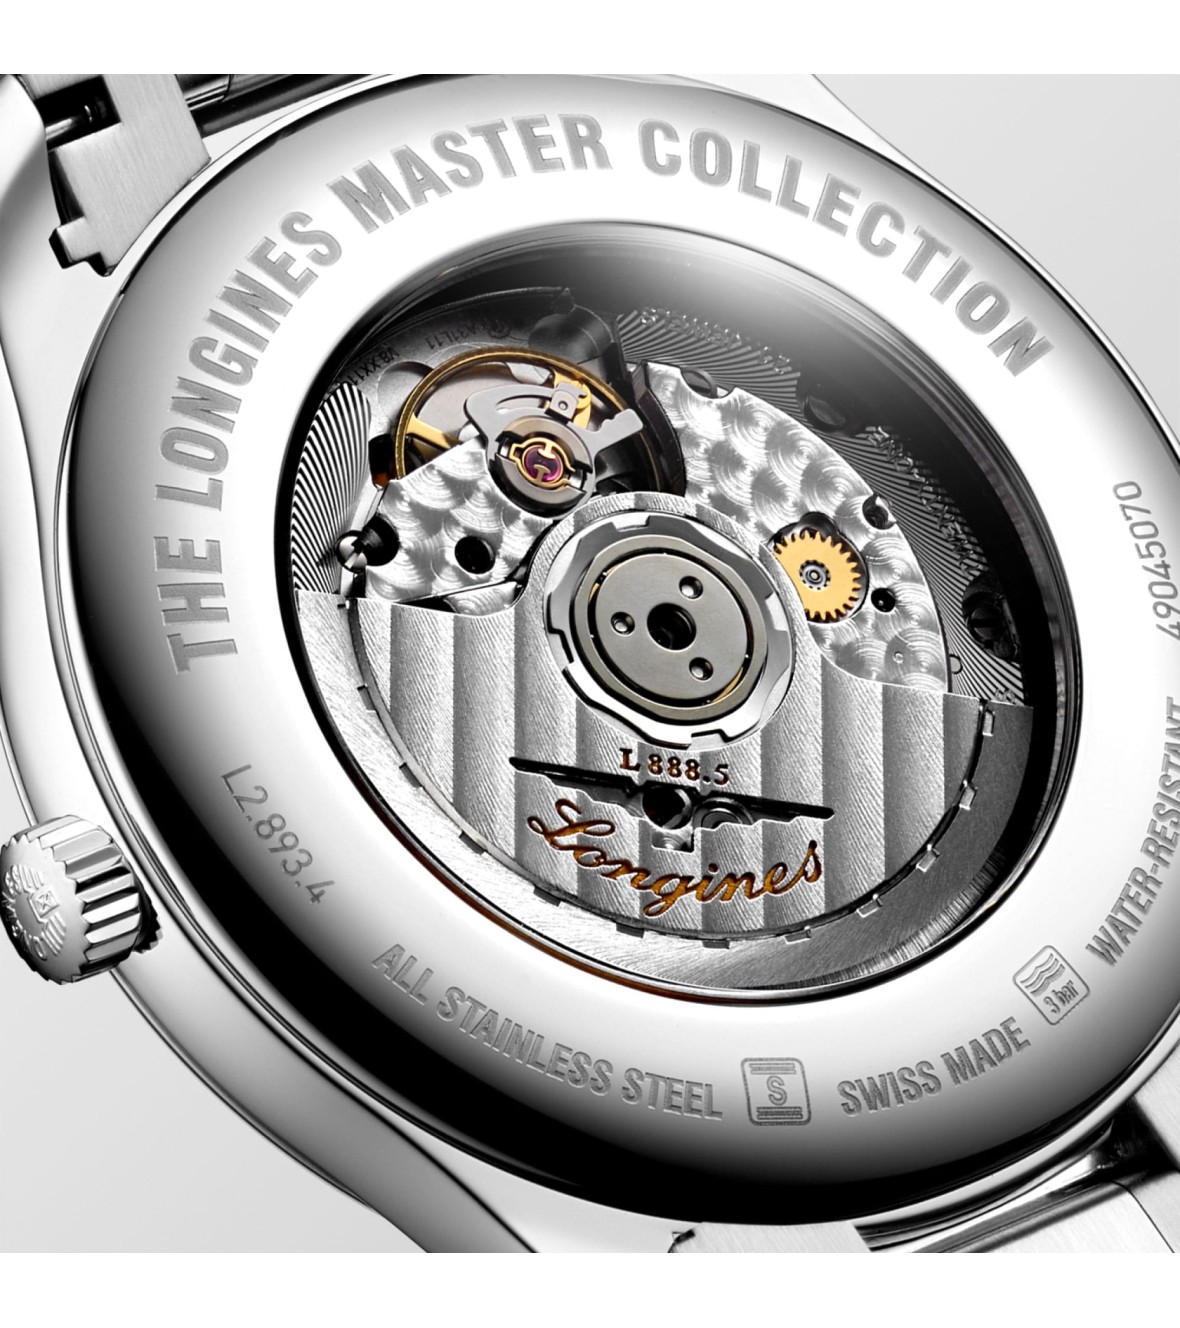 The Longines Master Collection L2.893.4.09.6